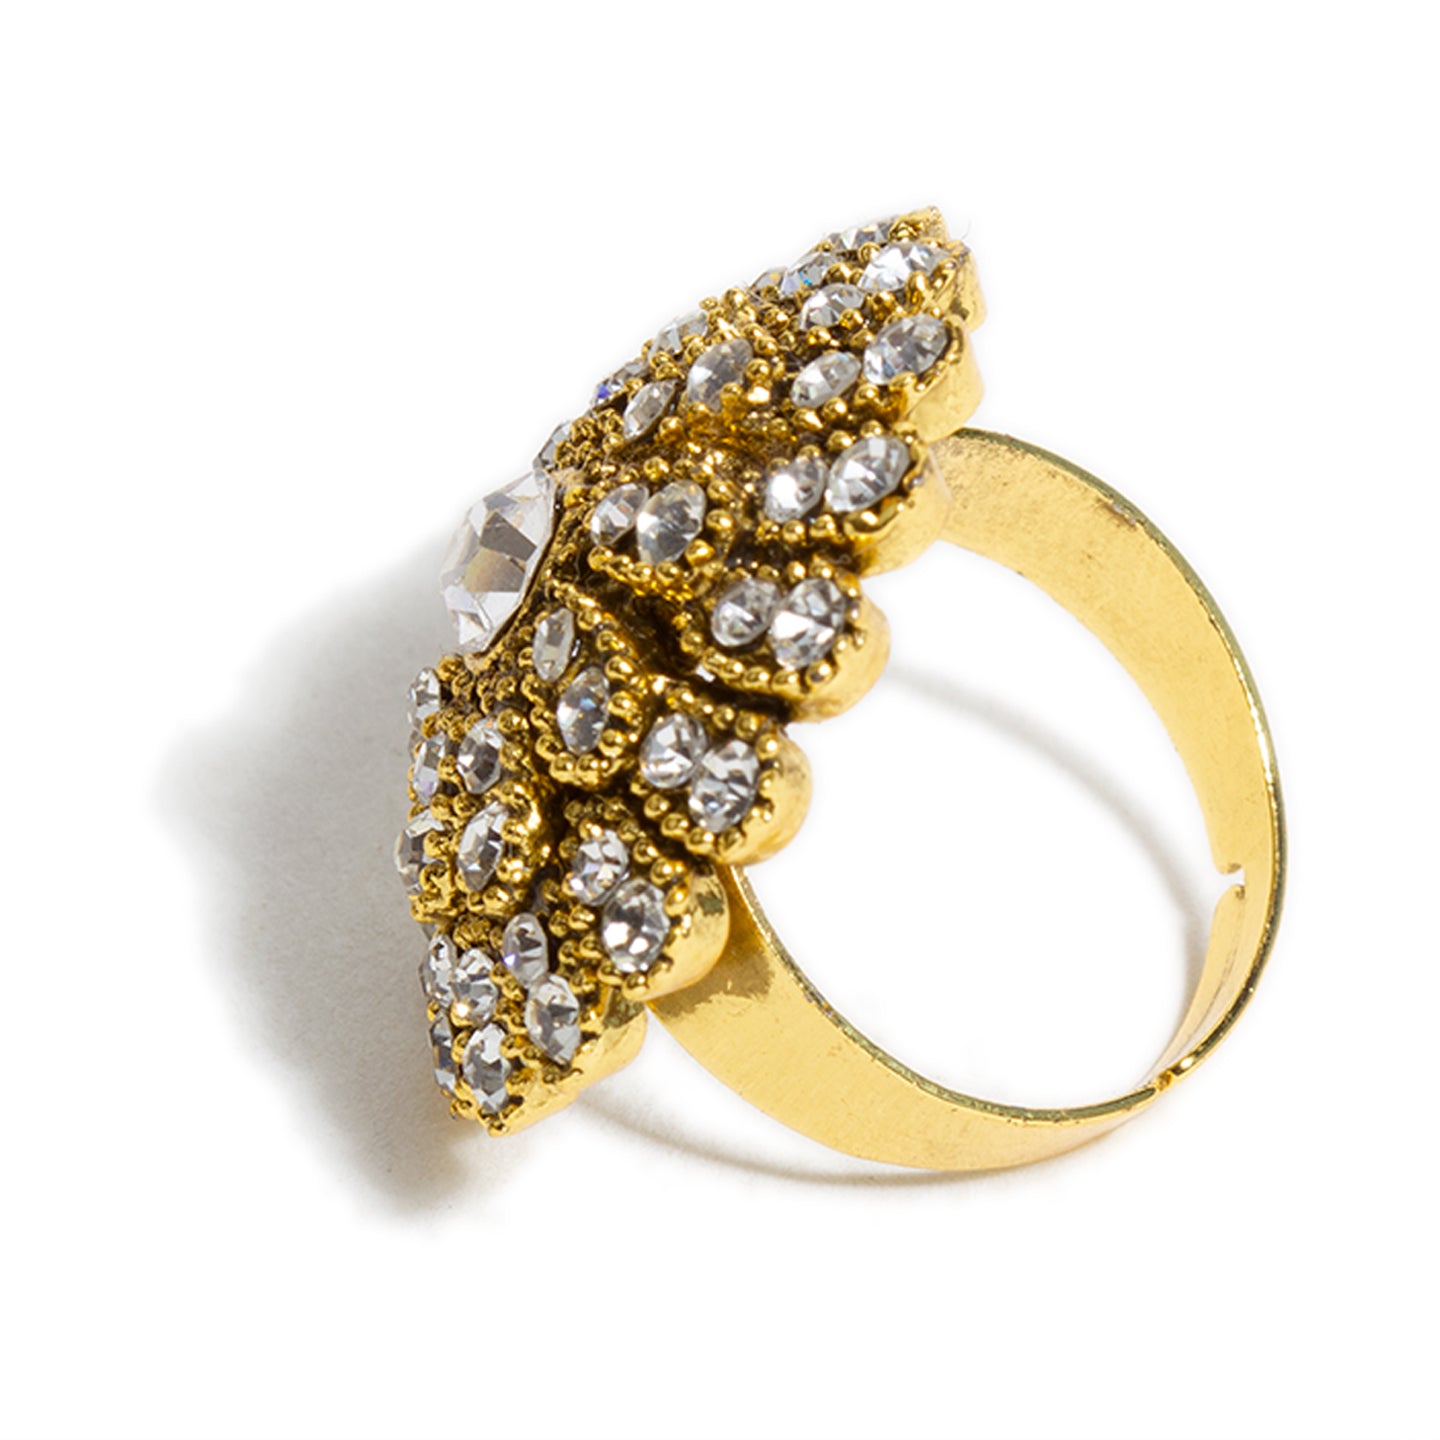 Buy Stylish Fancy Designer Metal Rings For Women Online In India At  Discounted Prices